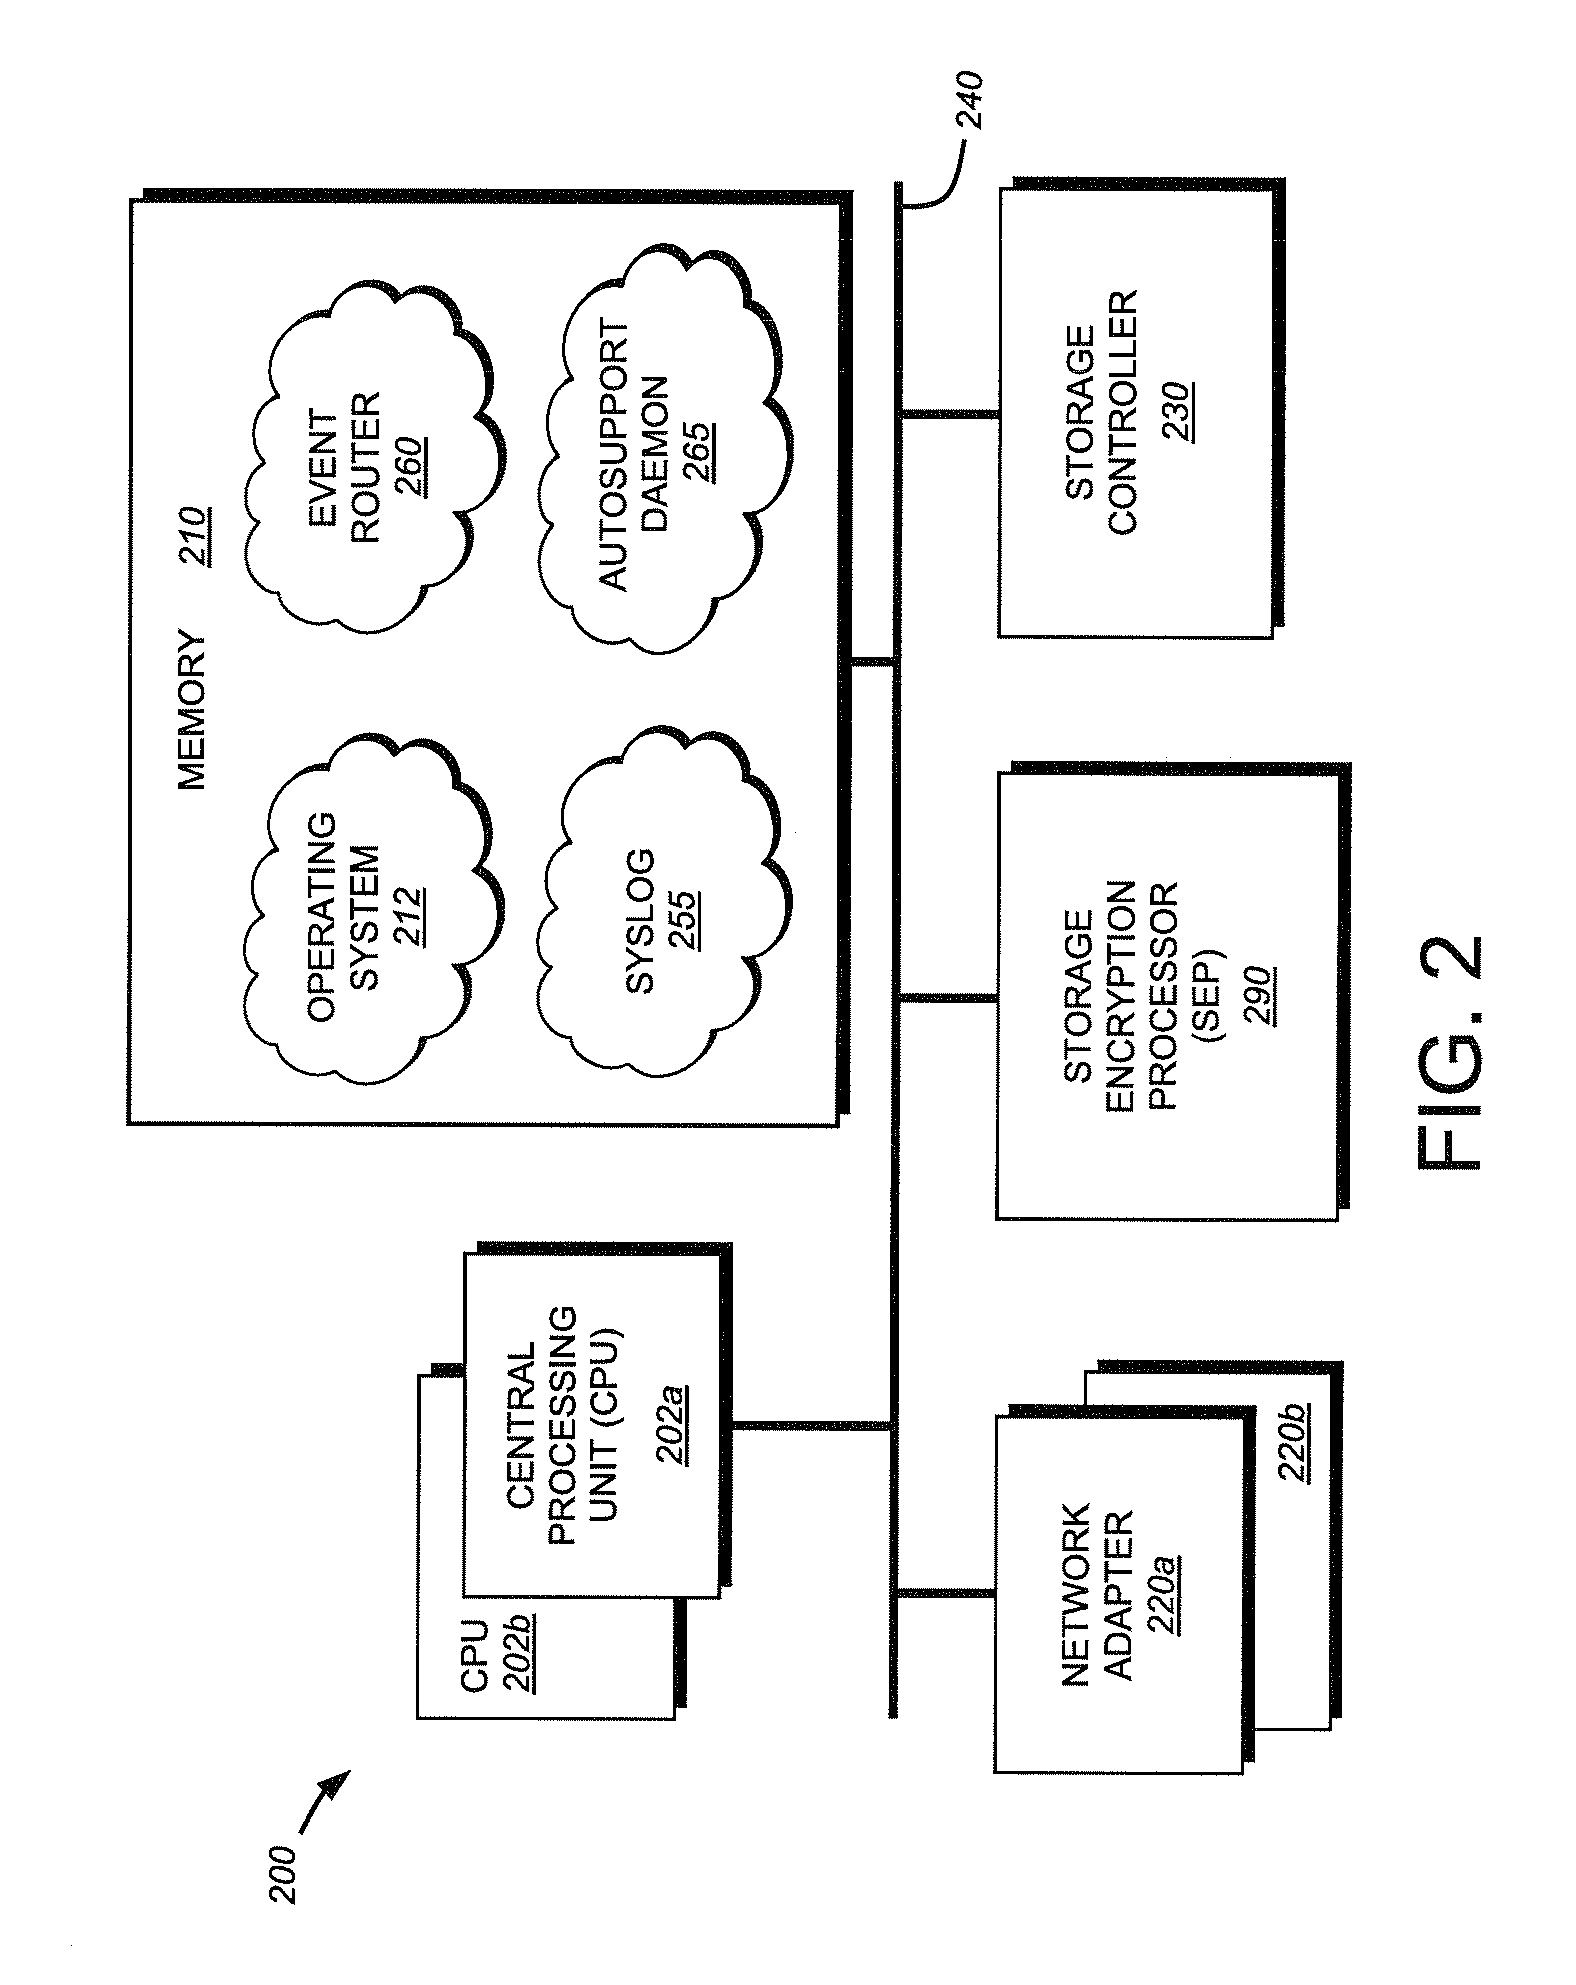 System and method for providing autosupport for a security system